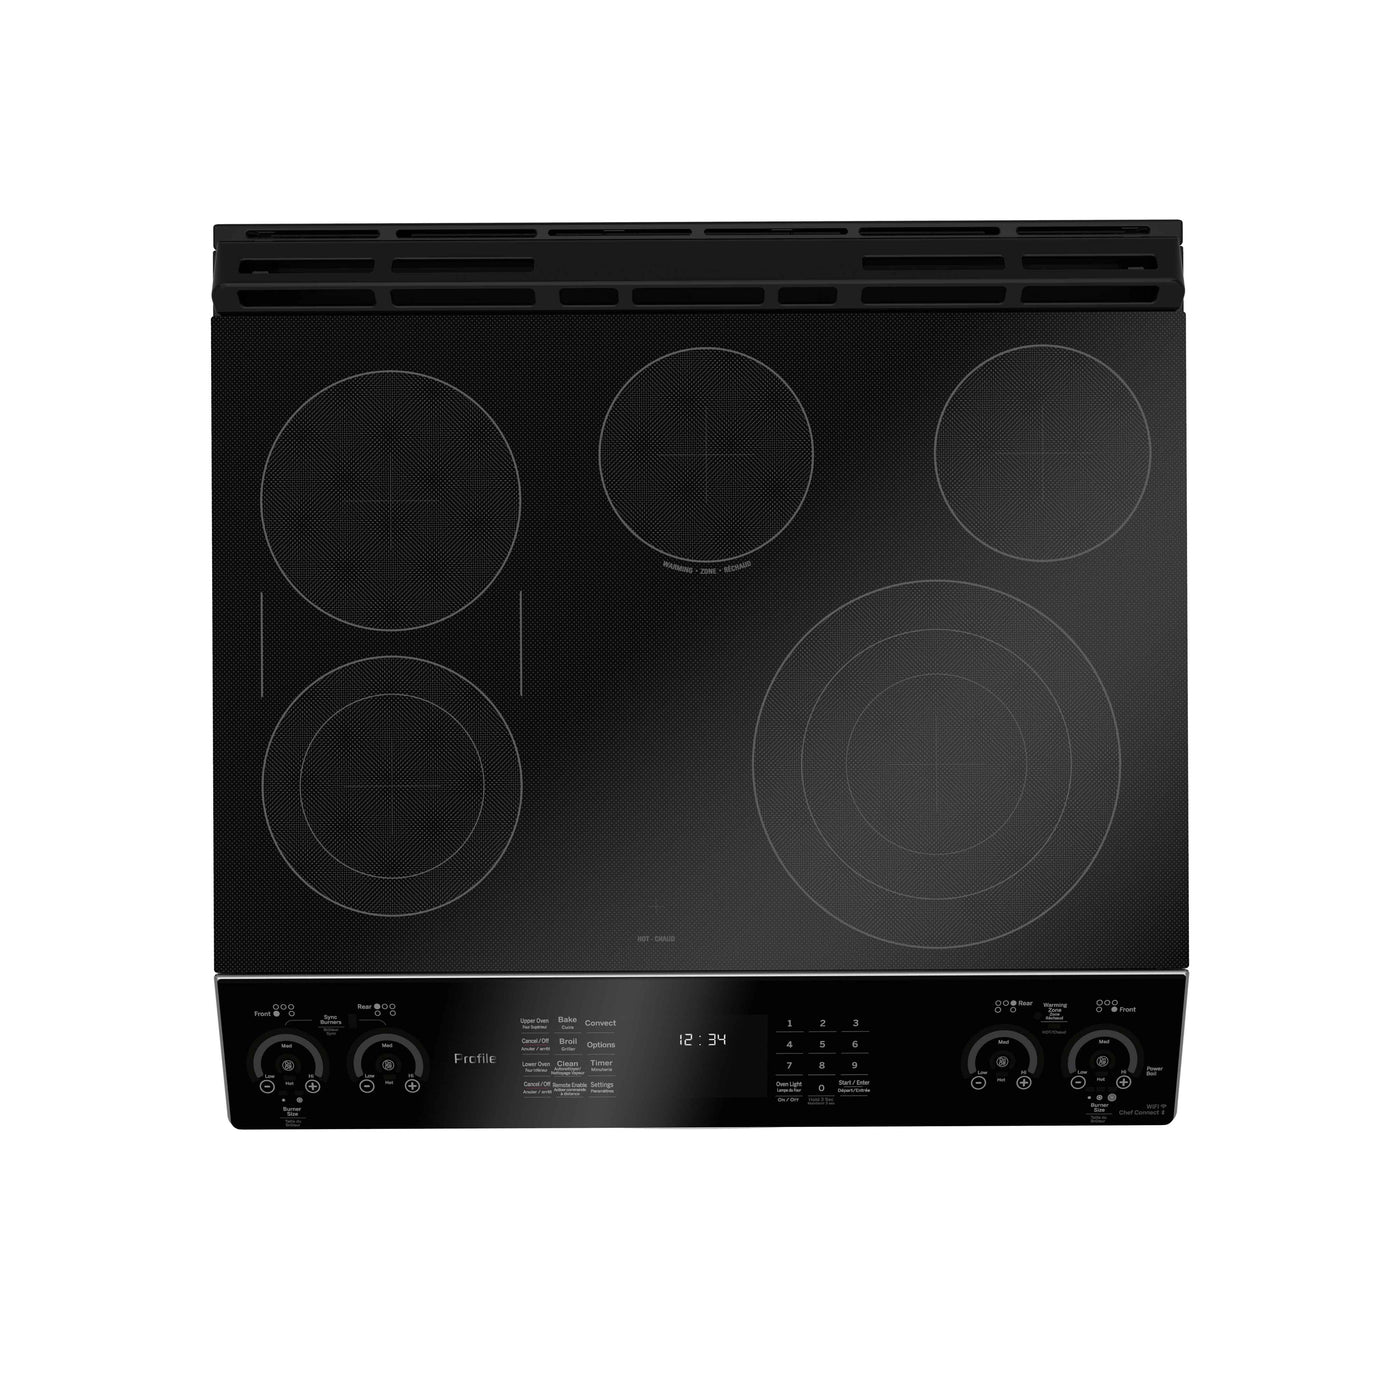 GE Profile Stainless Steel 30" Slide-In Electric Double Oven Range with Air Fry and Self Clean Racks (6.7 Cu. Ft.) - PCS980YMFS